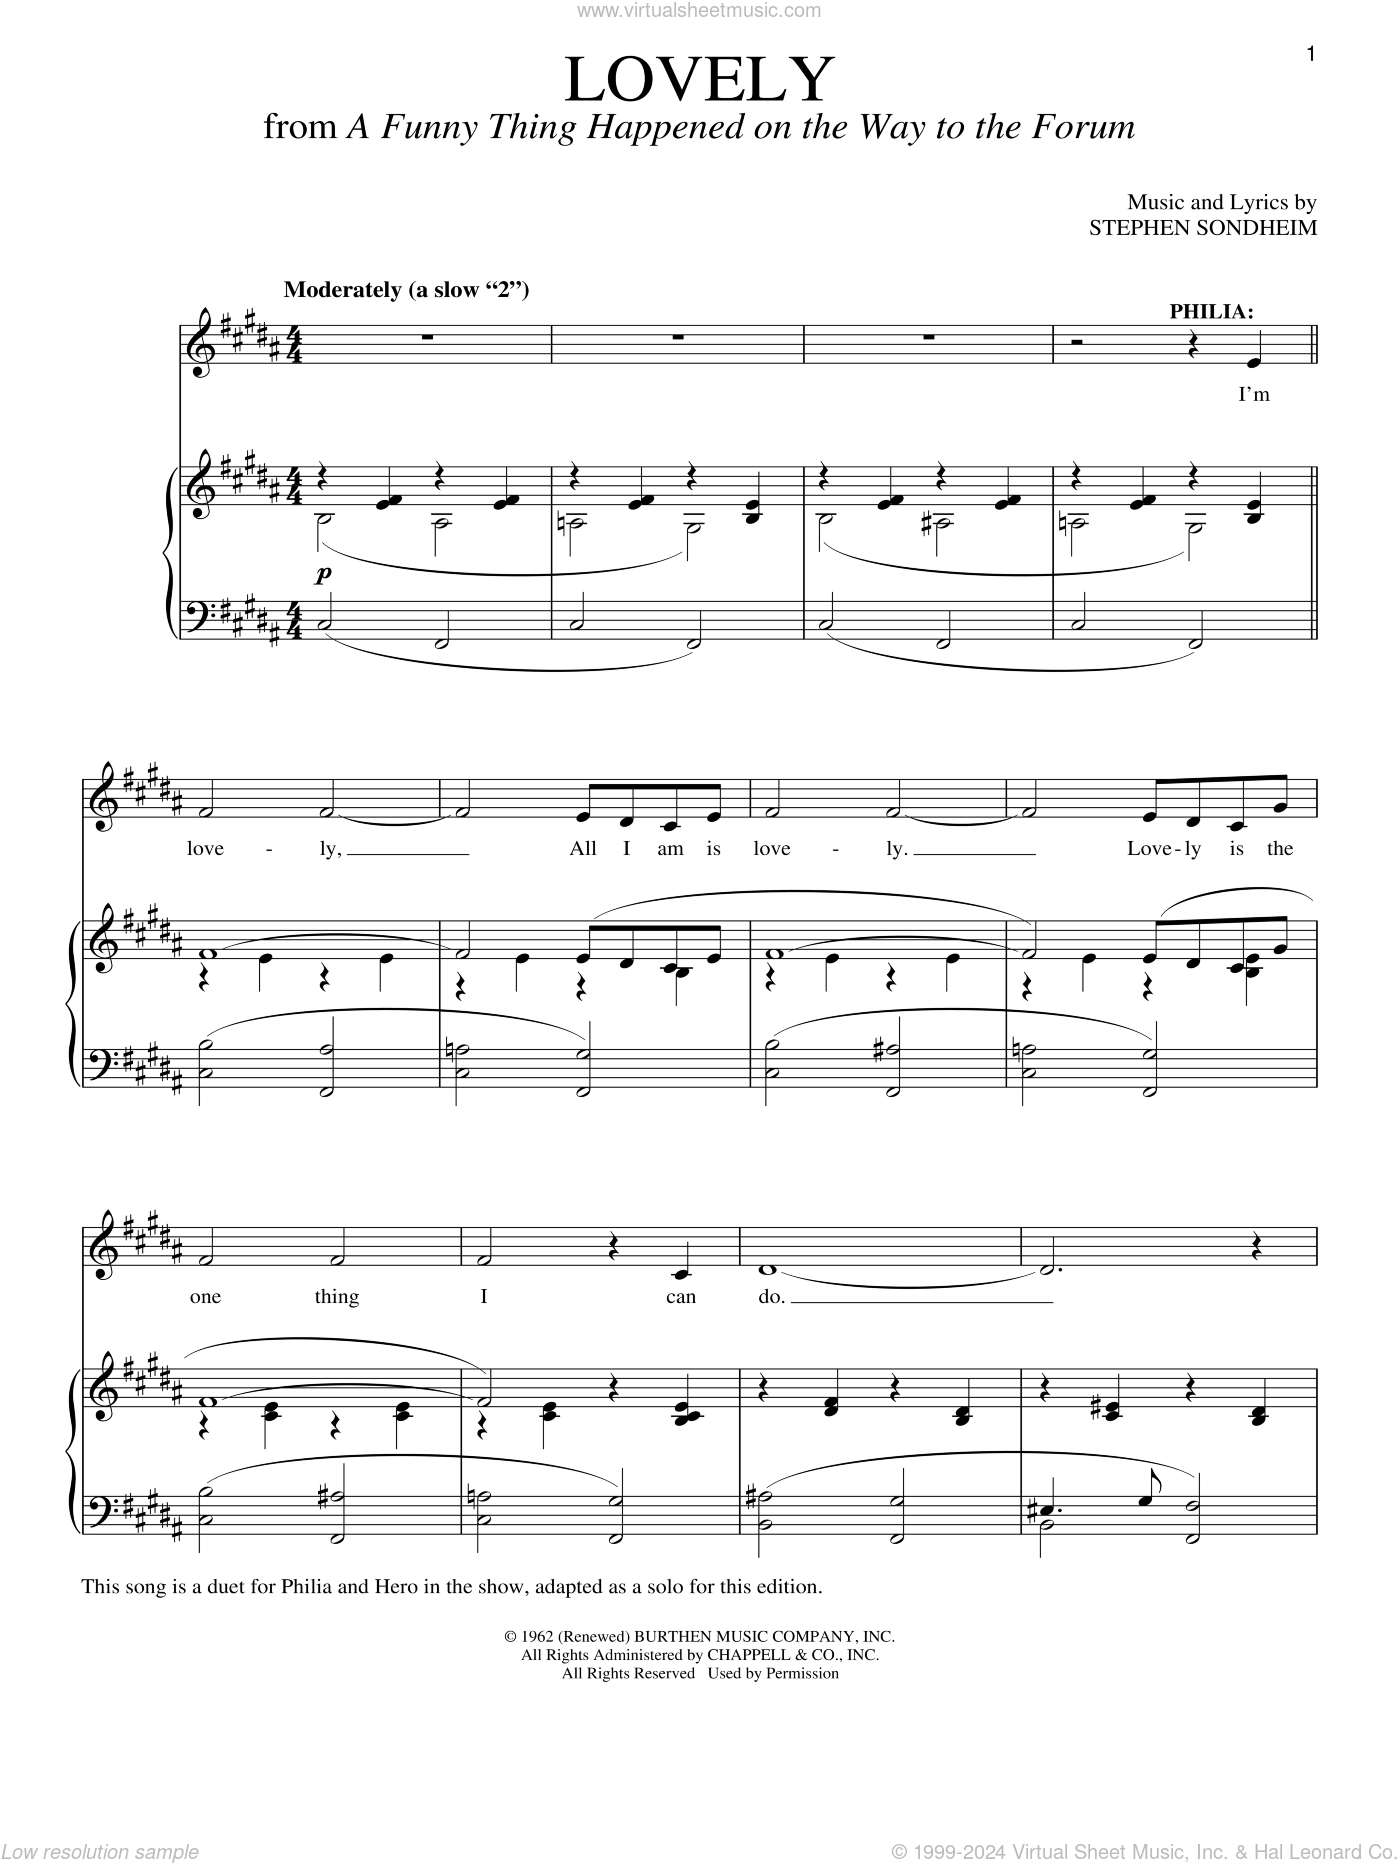 Sondheim Lovely Sheet Music For Voice And Piano Pdf 